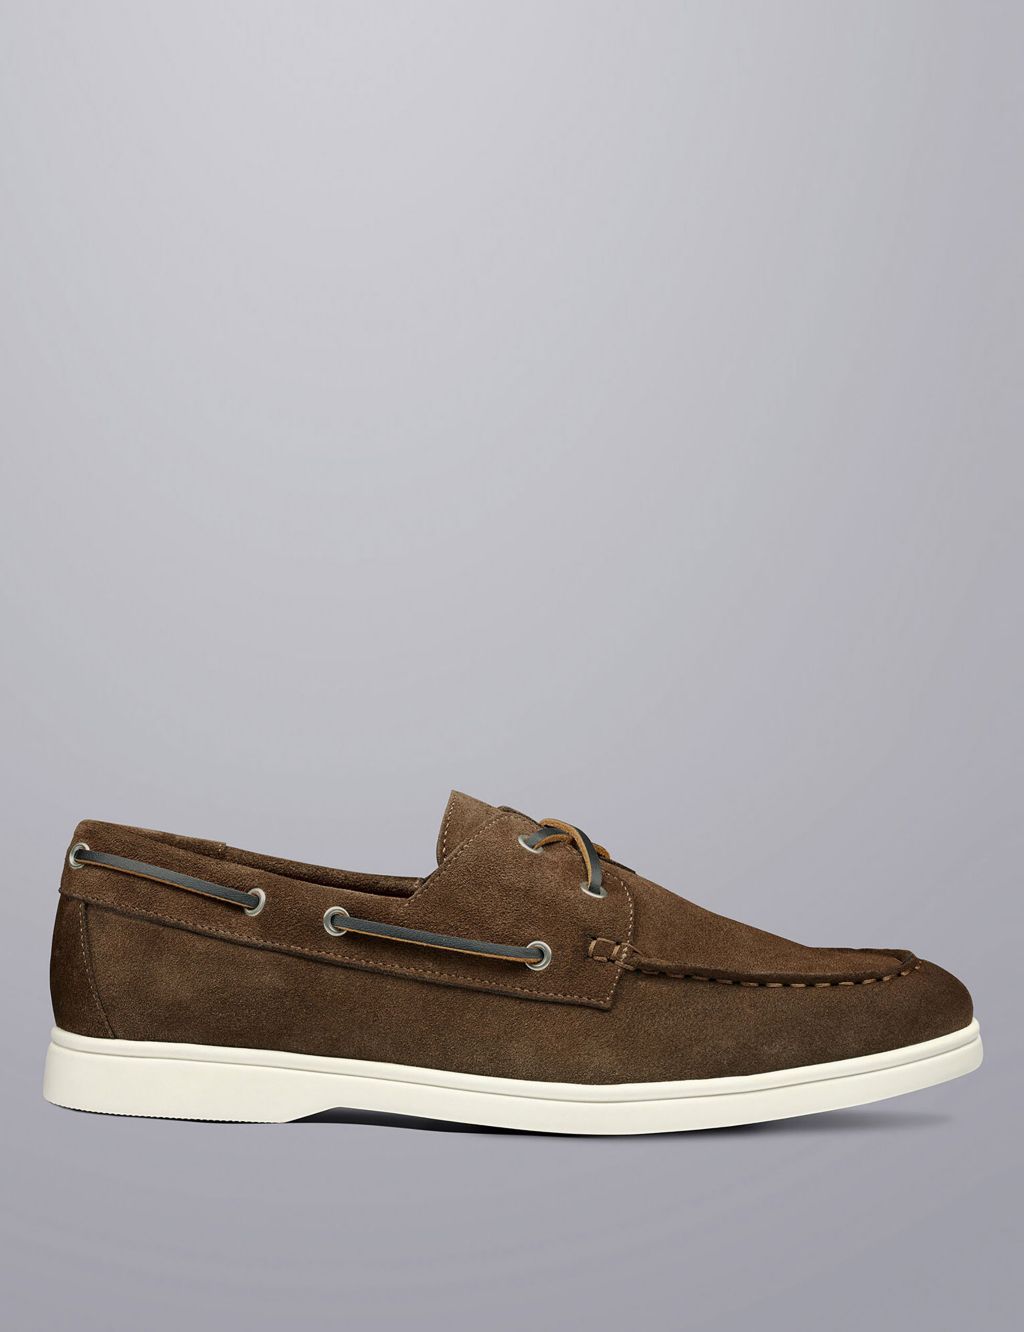 Suede Slip On Boat Shoes image 1